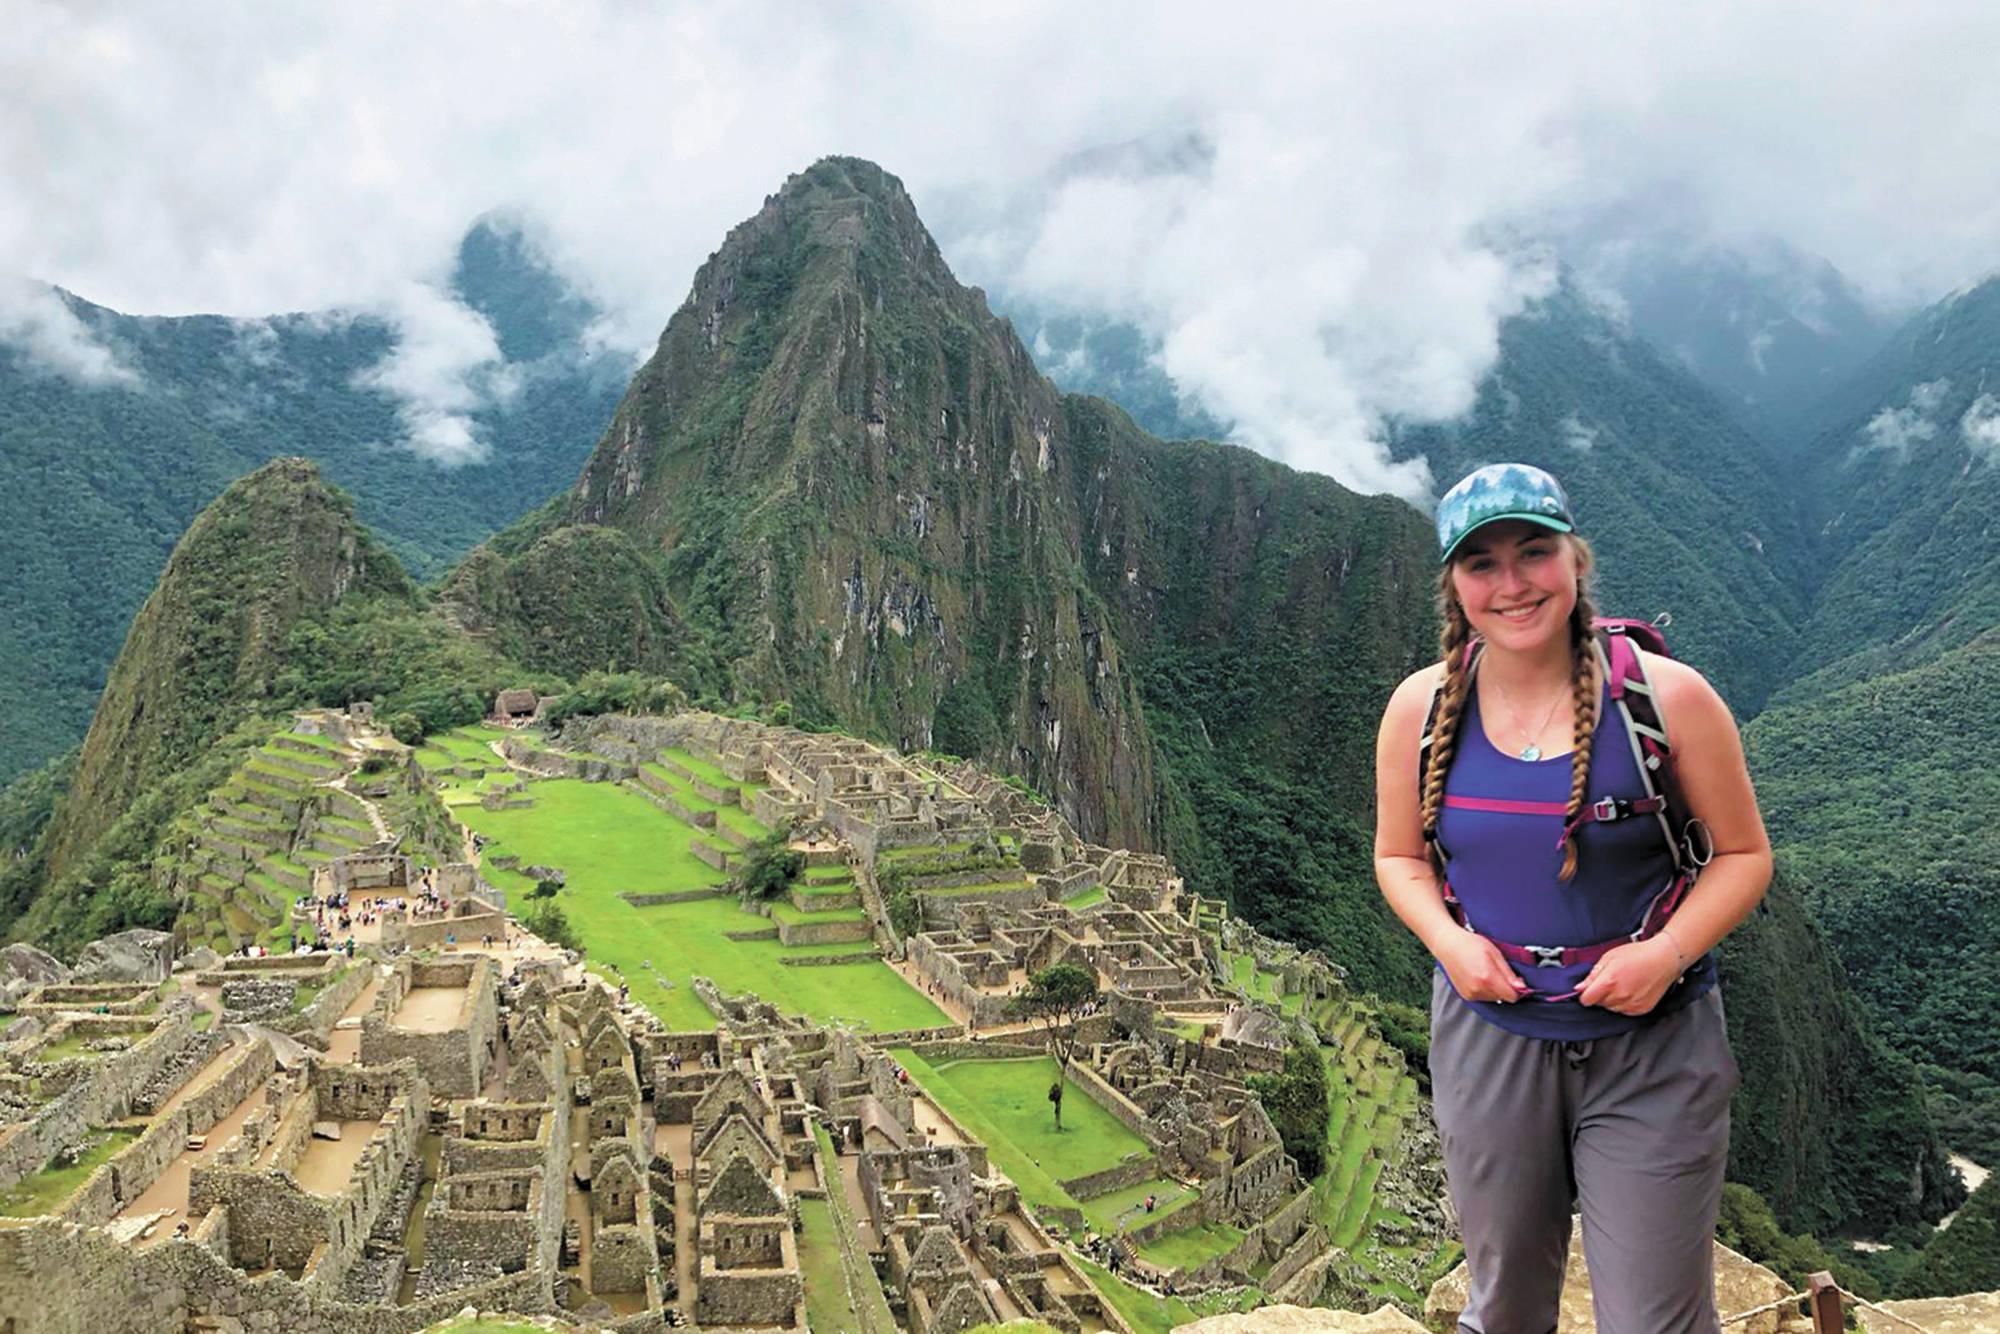 Brenna McCarron, a Homer High School graduate stuck in Peru after the country closed its borders to stem the spread of the novel coronavirus, stands at Machu Picchu, Peru. She was one of about 19 Alaskans stranded in the country at the time. (Photo courtesy Brenna McCarron)